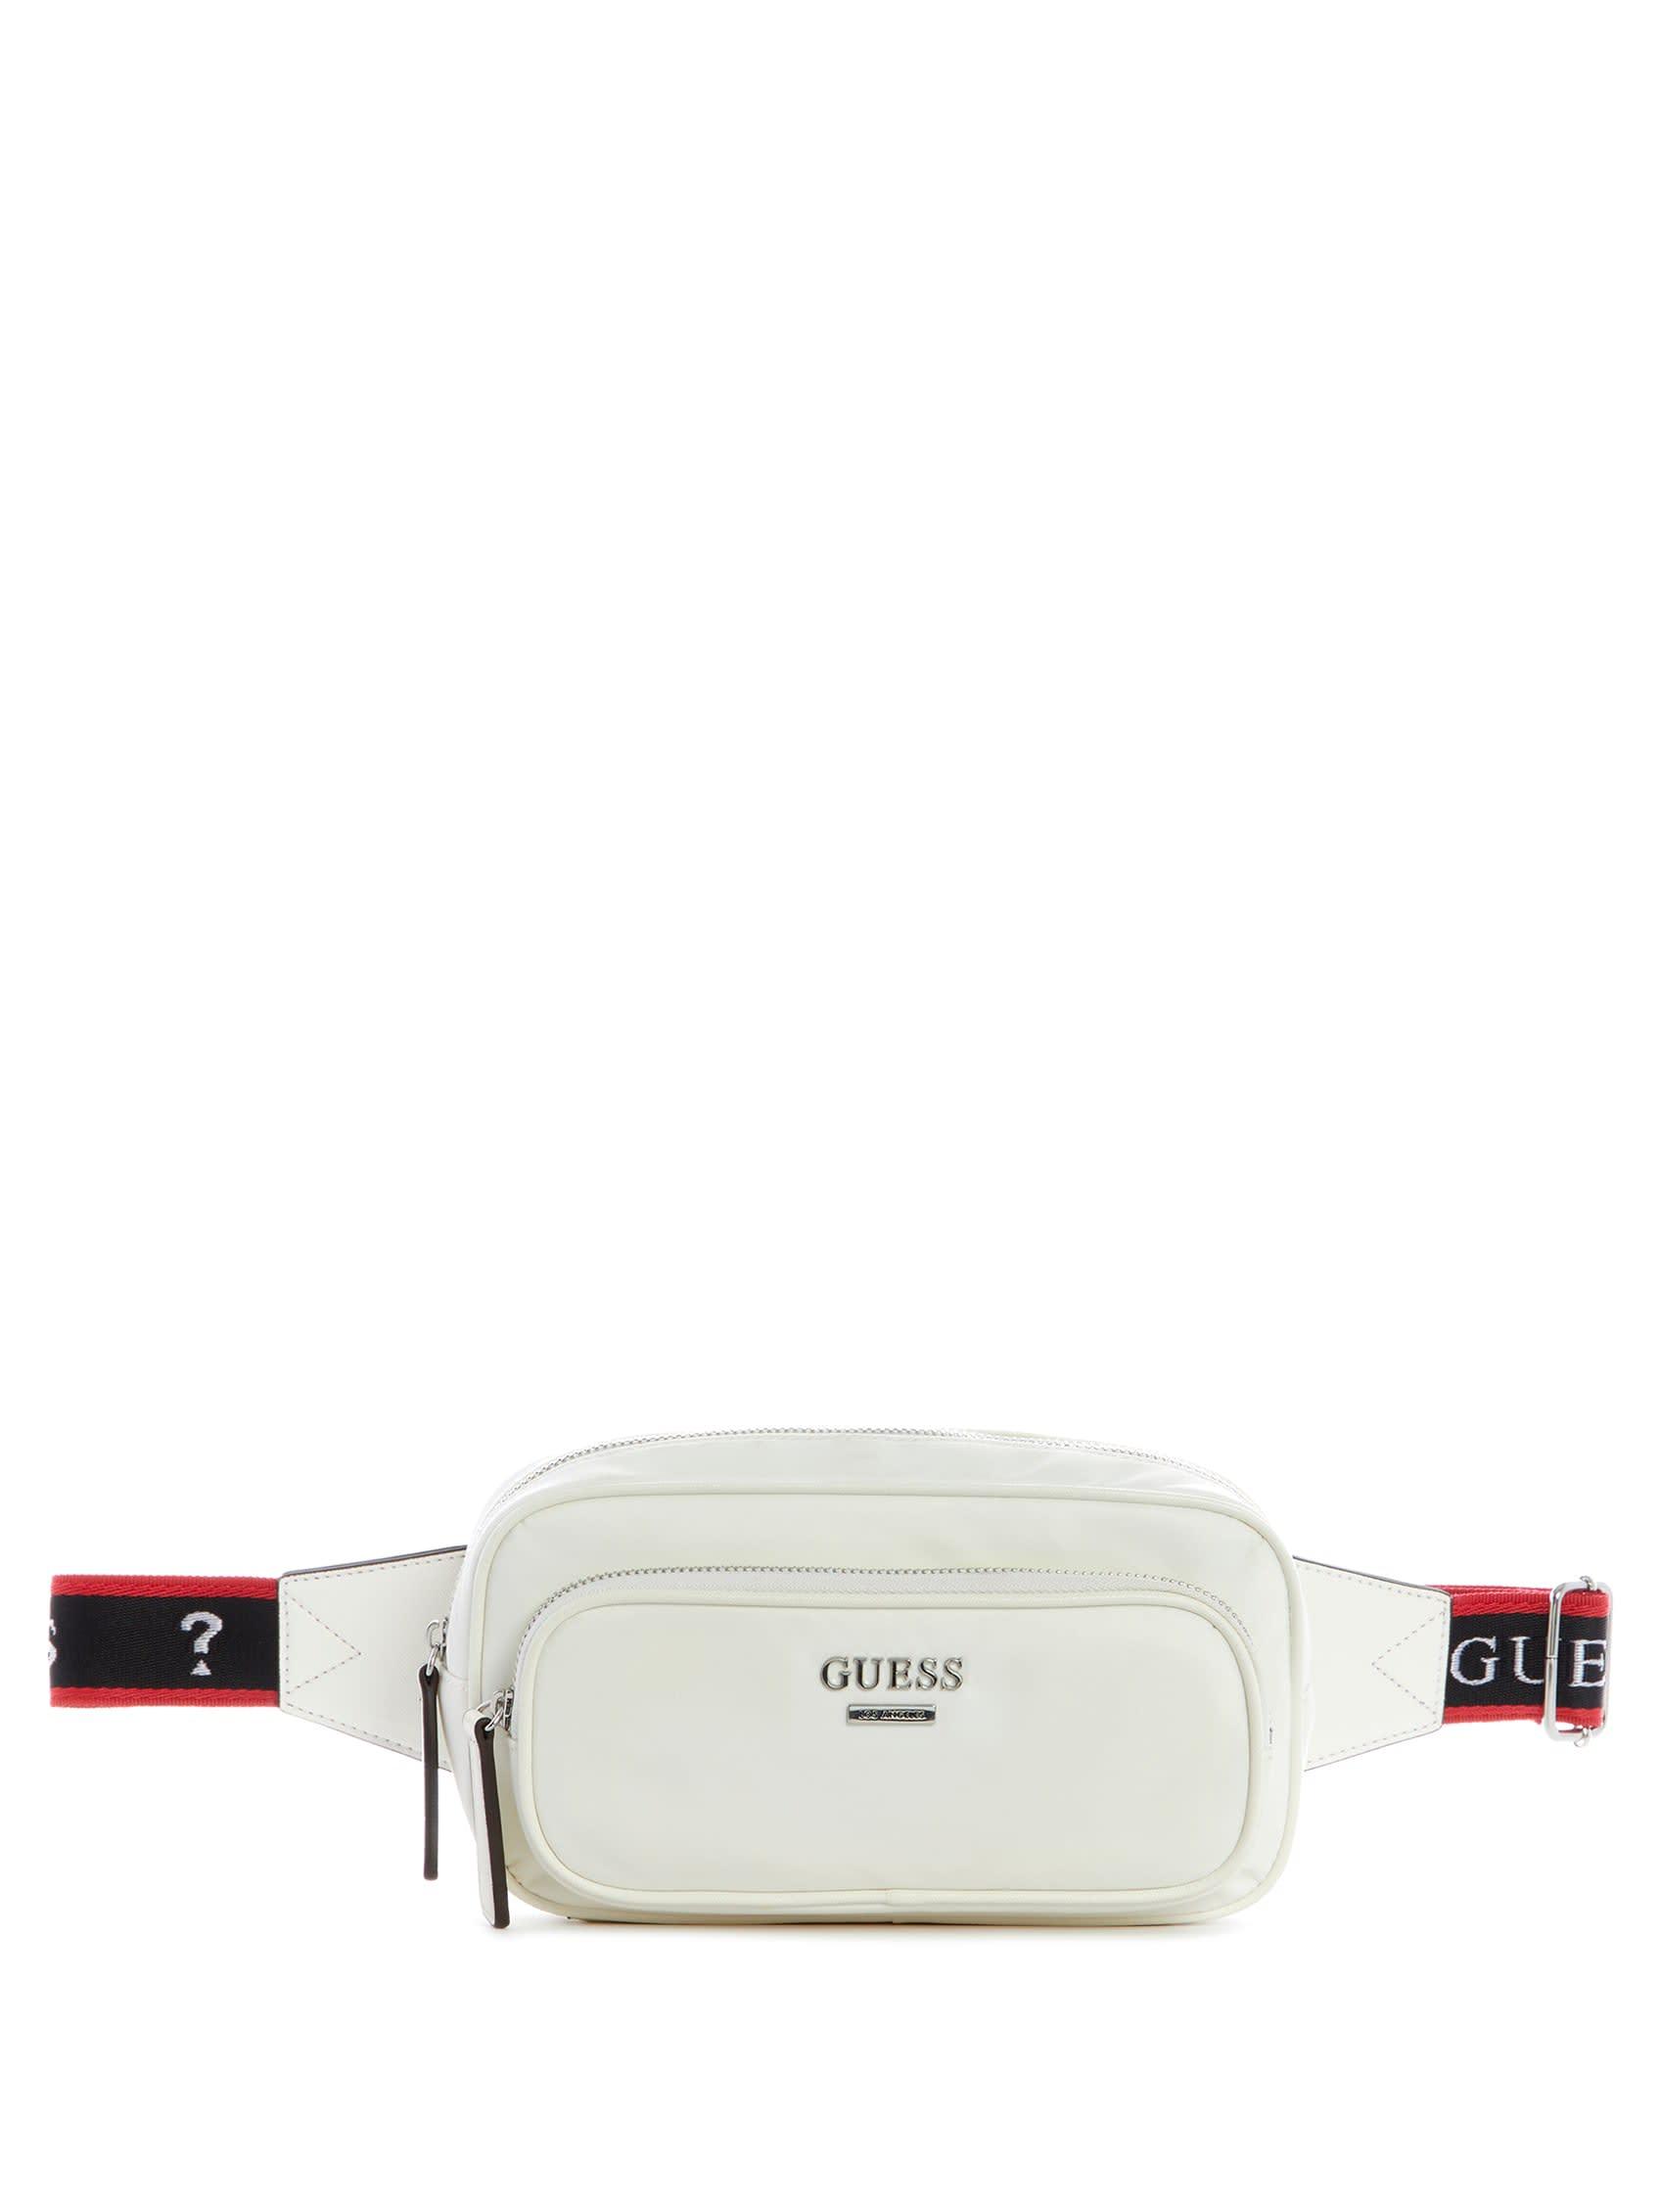 Guess Factory Rayna Nylon Fanny Pack in White | Lyst